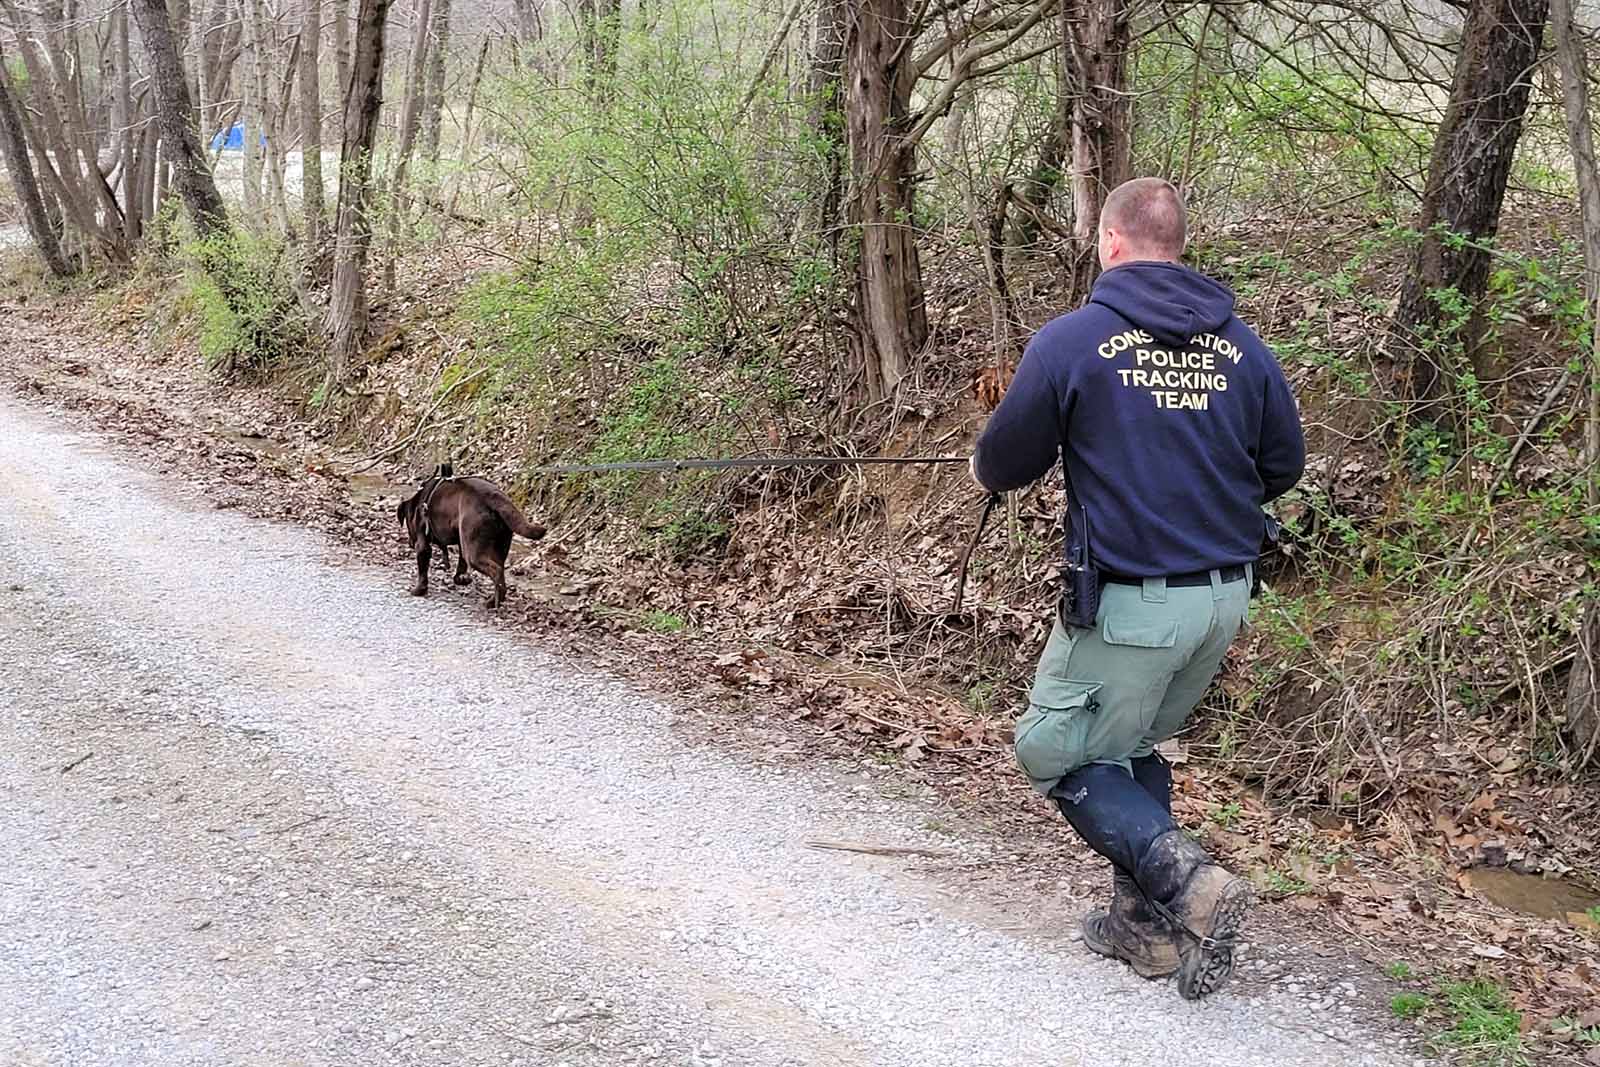 A Conservation Police Officer walking behind a K9 on a leash